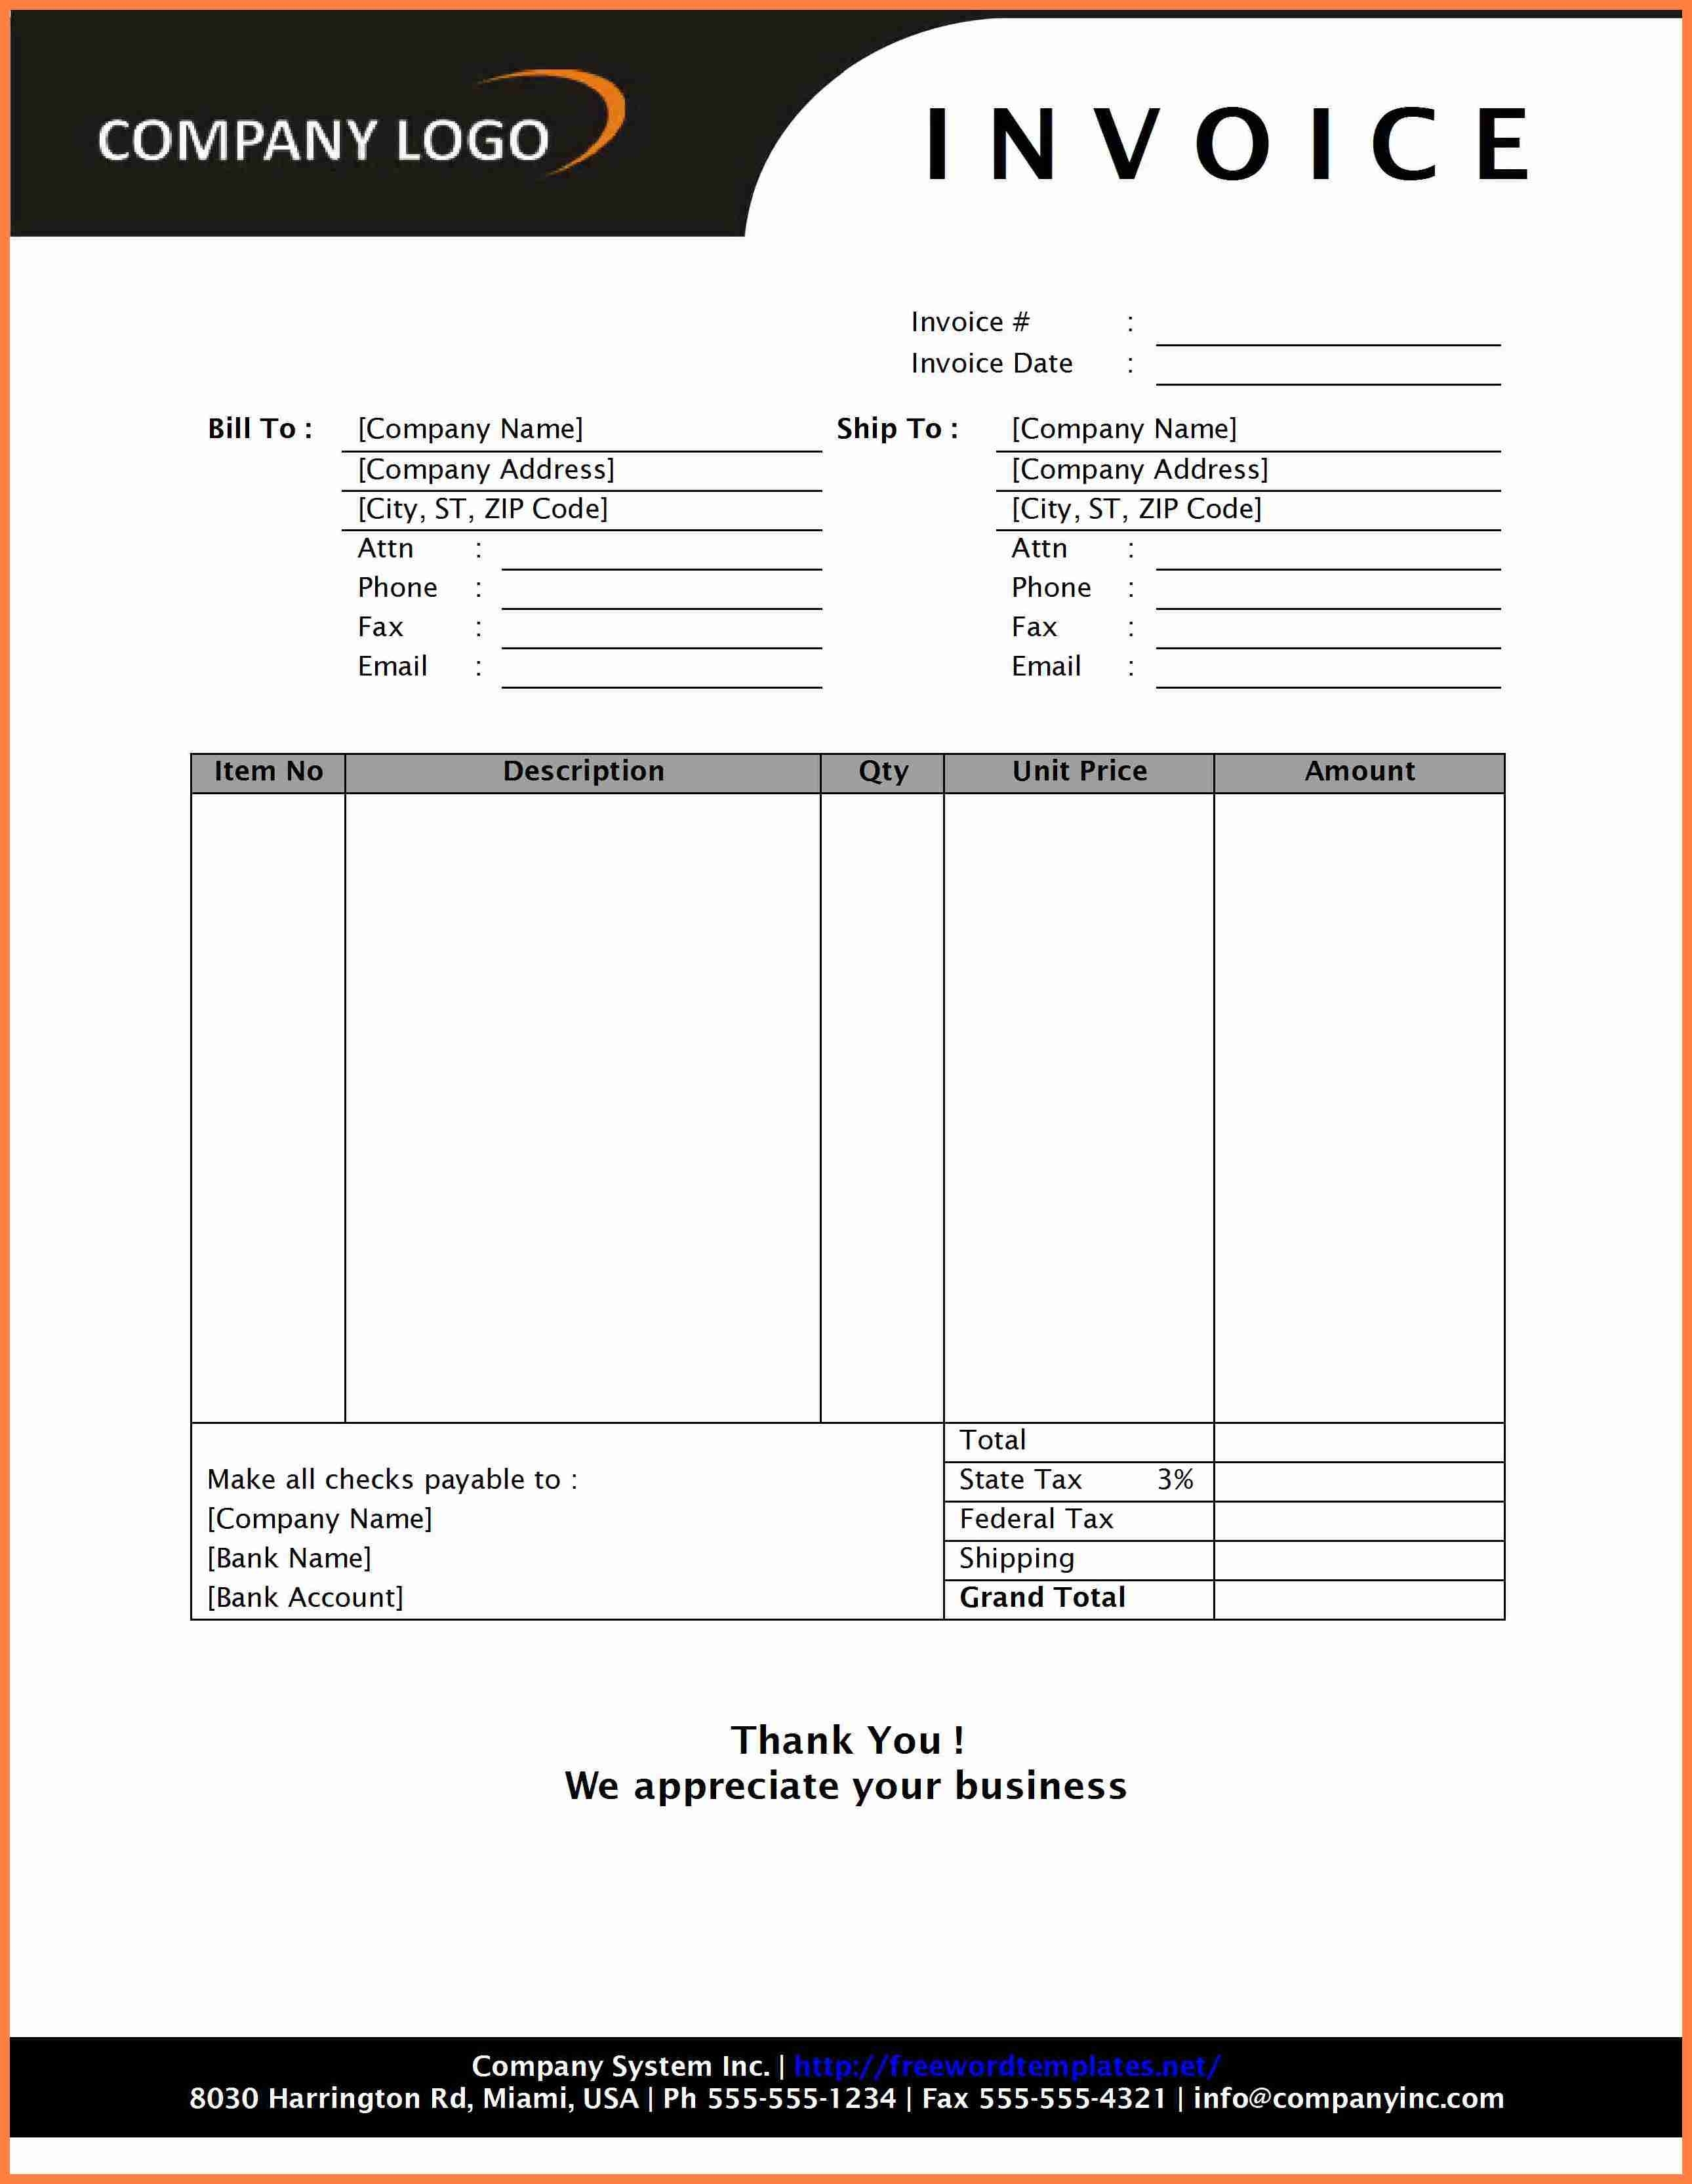 sales invoice format in word residers sale invoice format in word